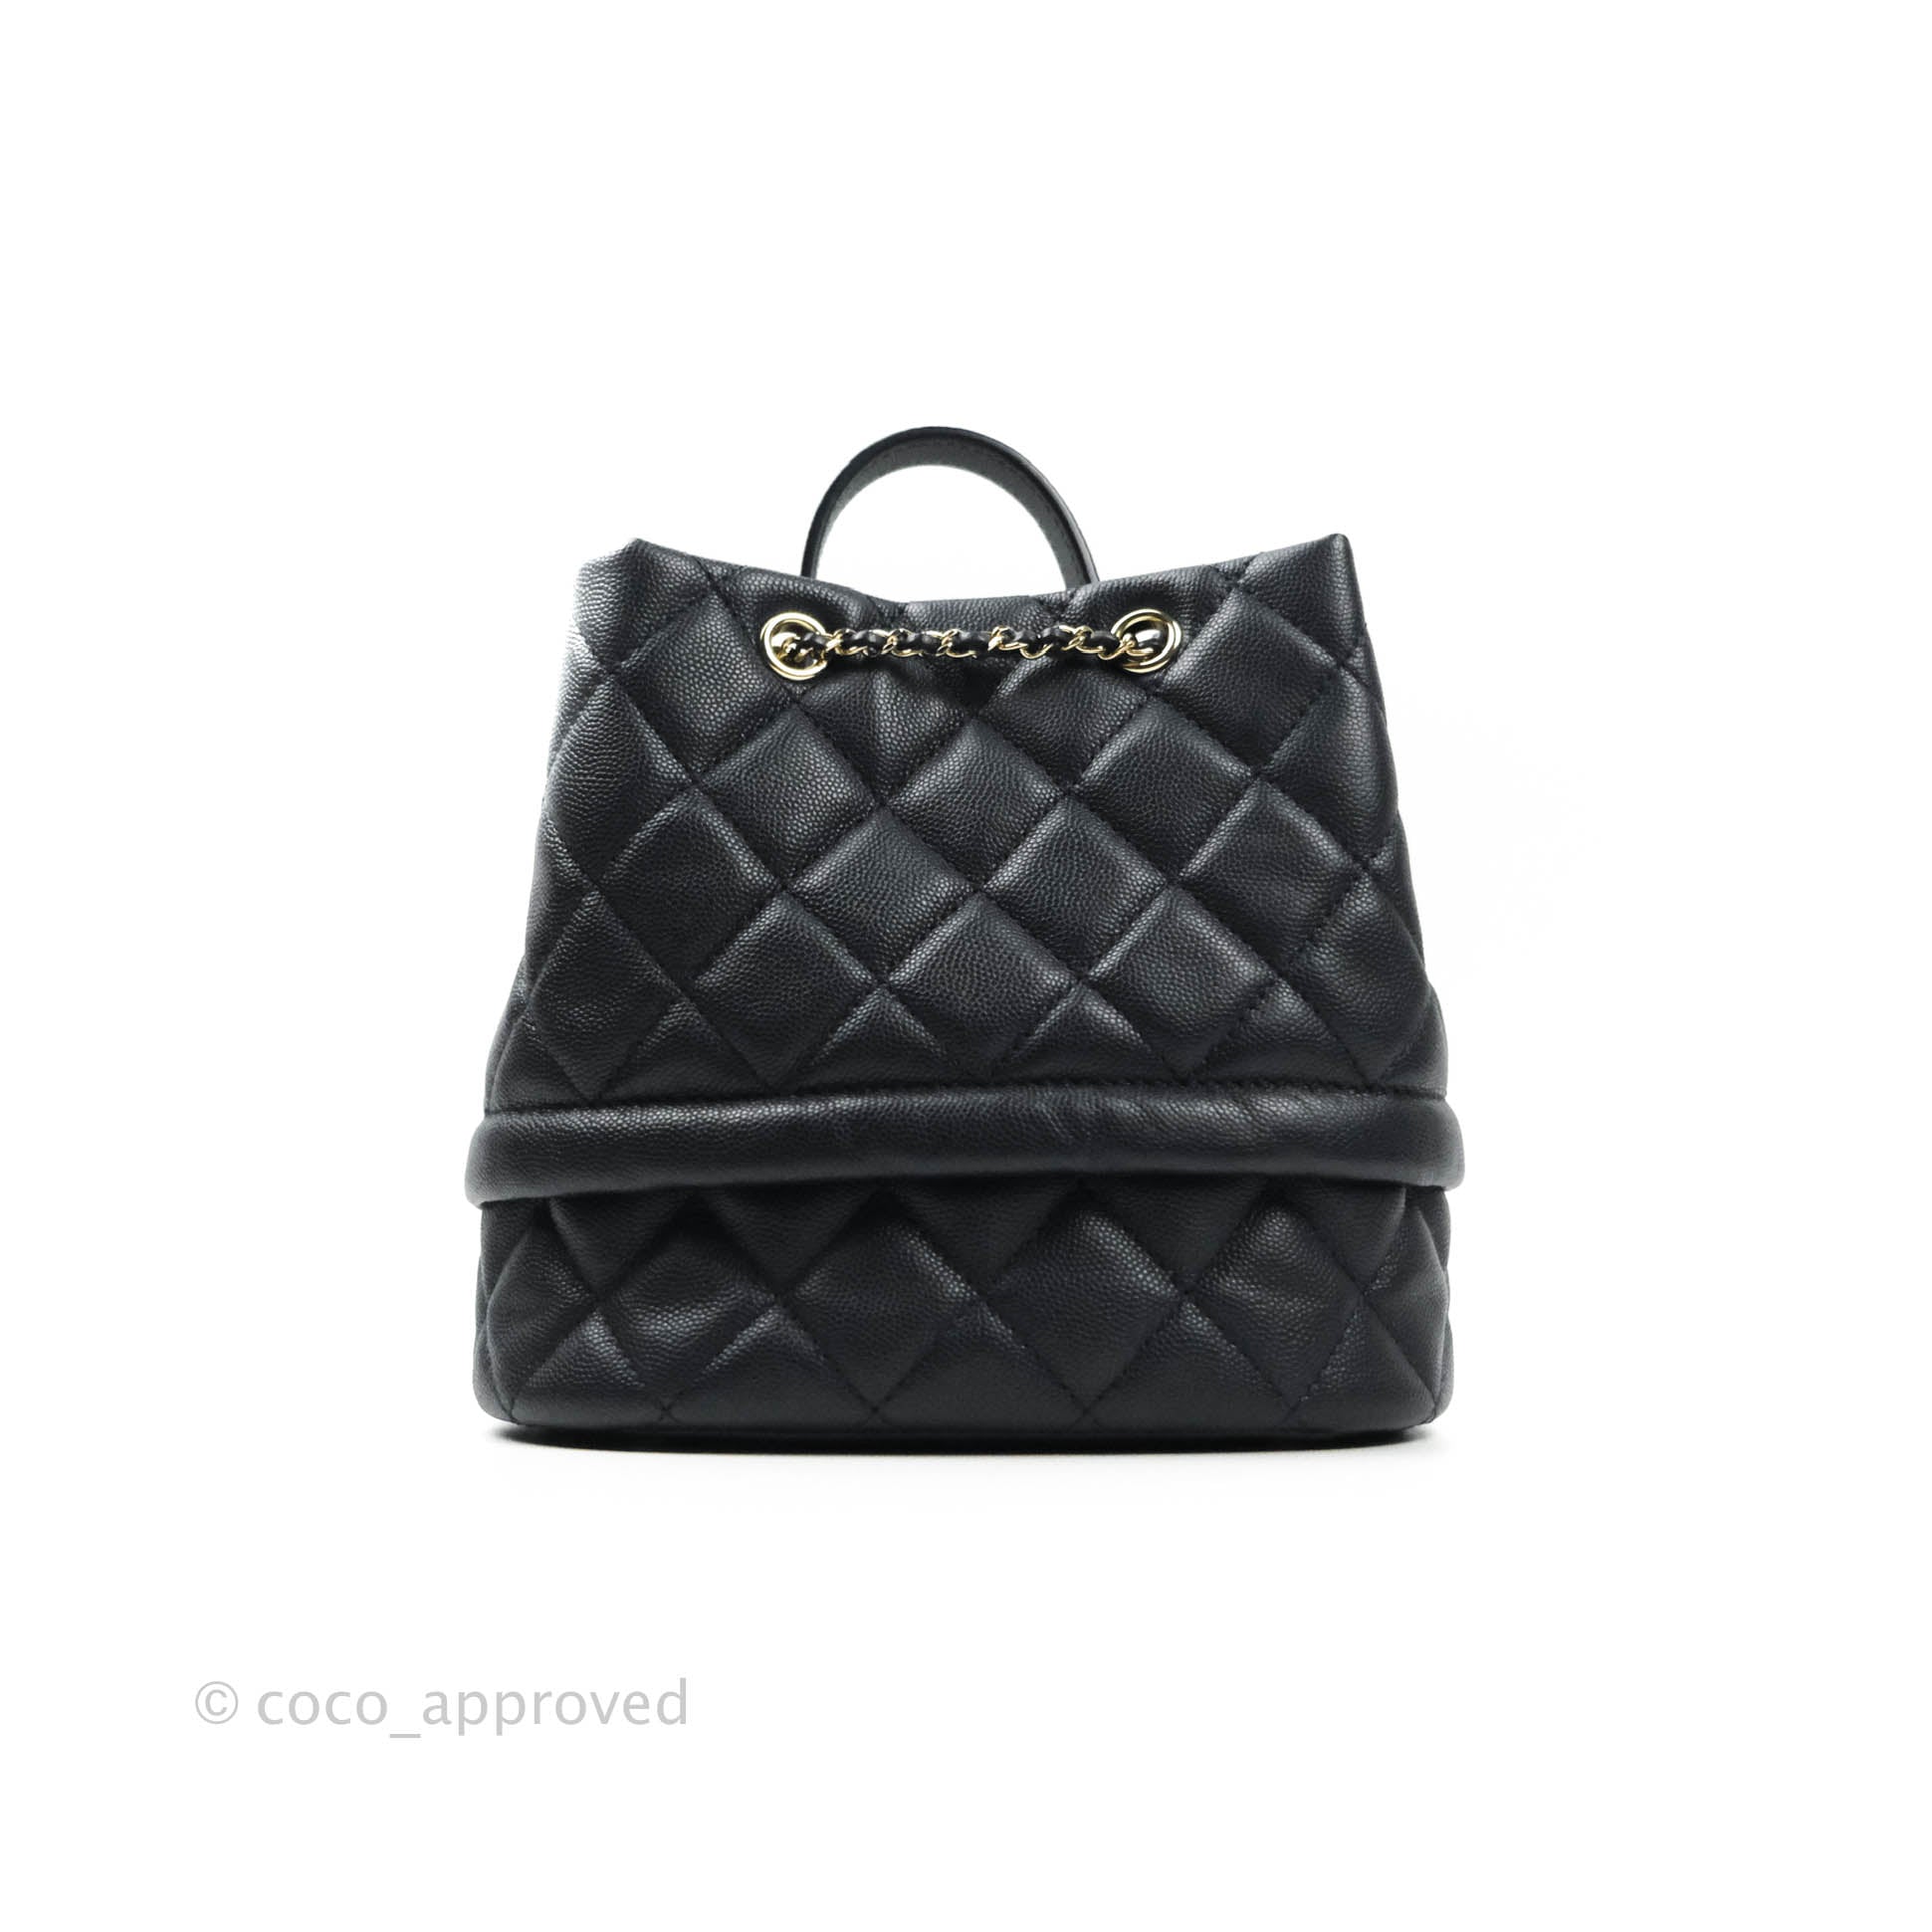 Chanel Caviar Quilted Rolled Up Bucket Drawstring Bag Black Gold